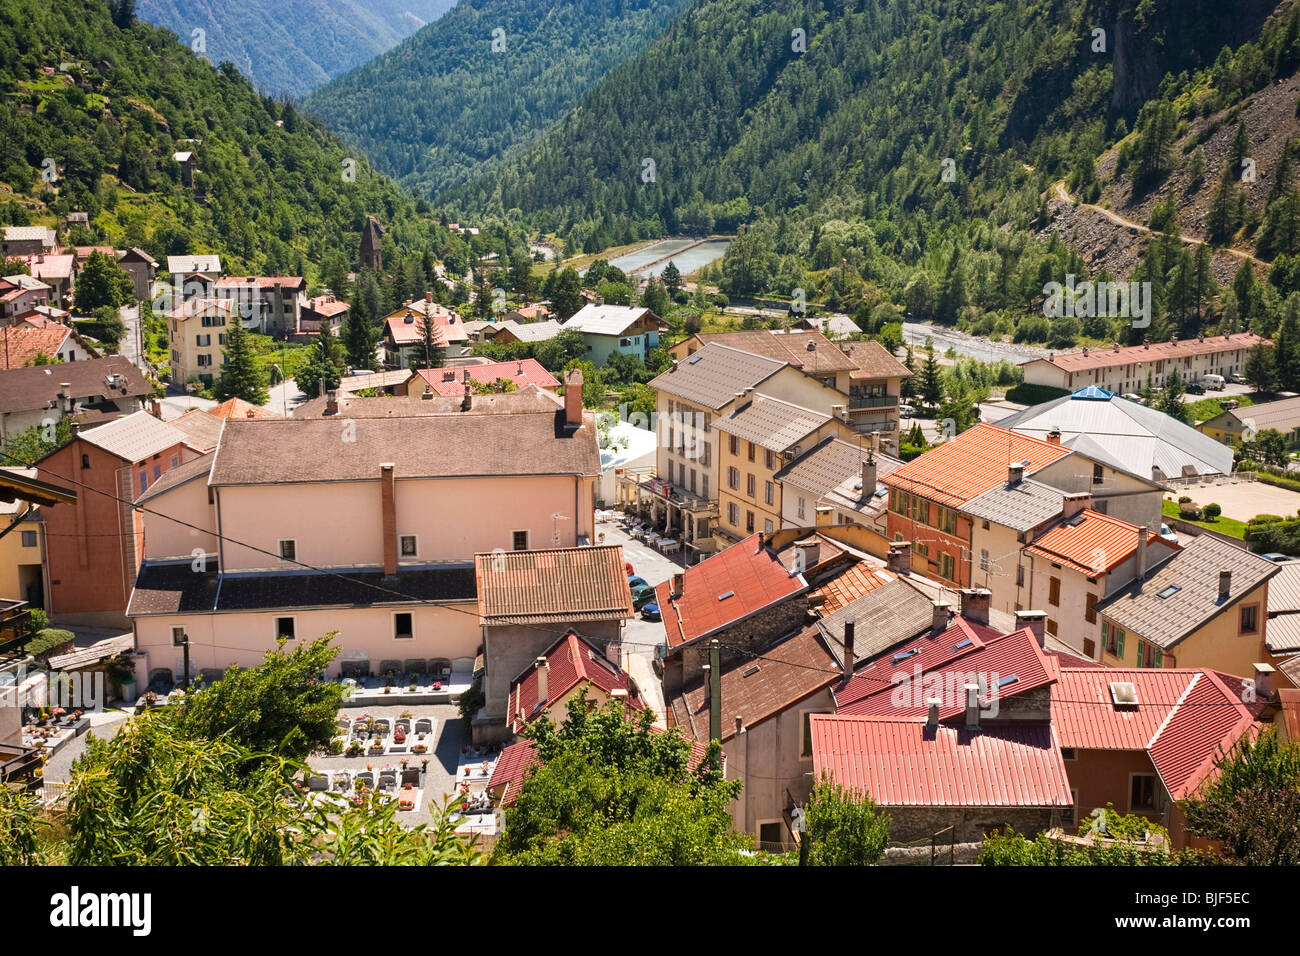 Isola in the Tinee Valley, Mercantour National Park, Parc National du Mercantor, Alpes Maritimes, France, Europe Stock Photo